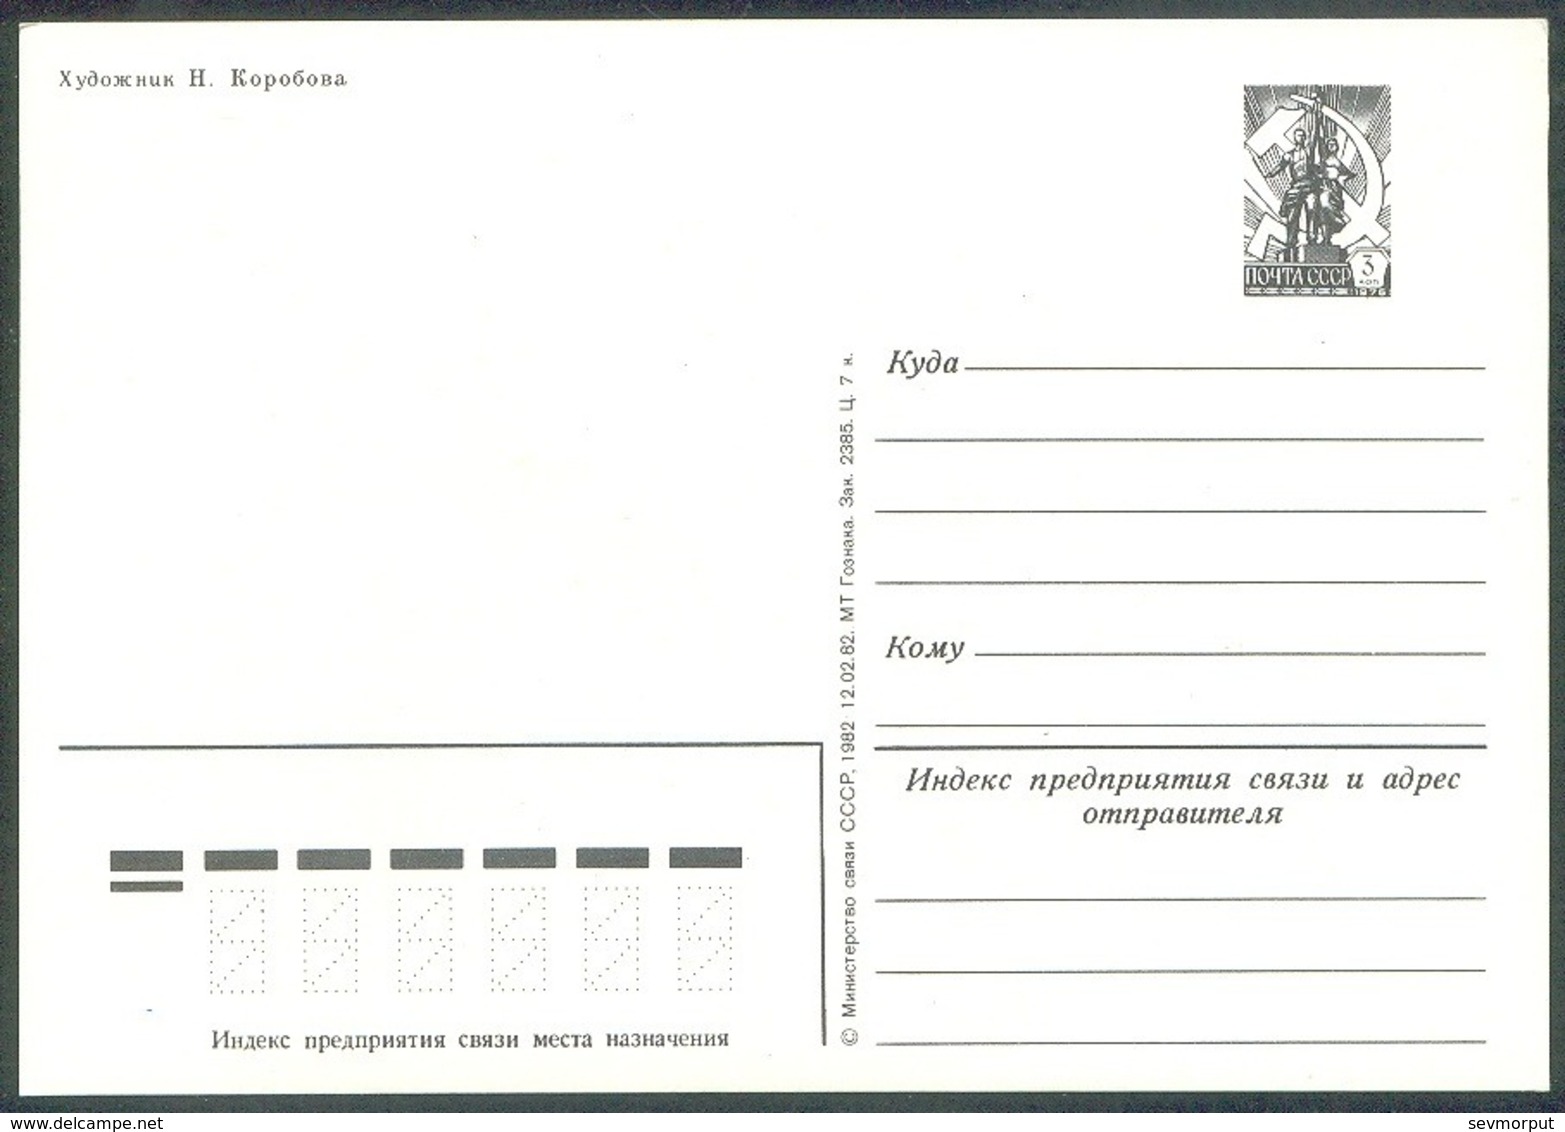 2018 RUSSIA 1982 ENTIER POSTCARD 2385 Mint MARCH 8 WOMAN Day MOTHER Celebration PINOCCHIO FAIRY TALES Conte Fee MARCHE - Muttertag